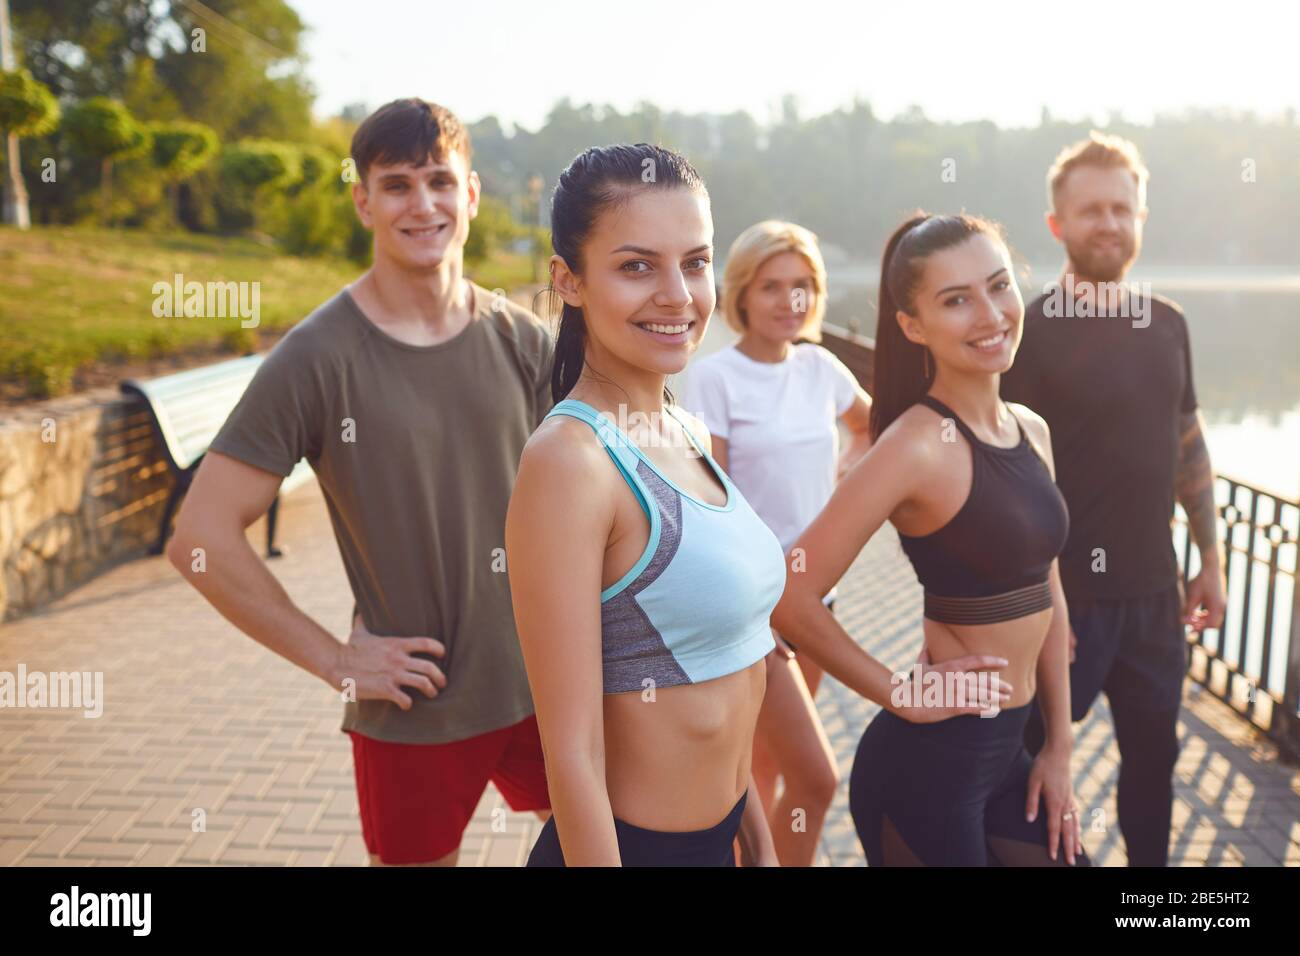 A group of sporty people training in the park. Stock Photo